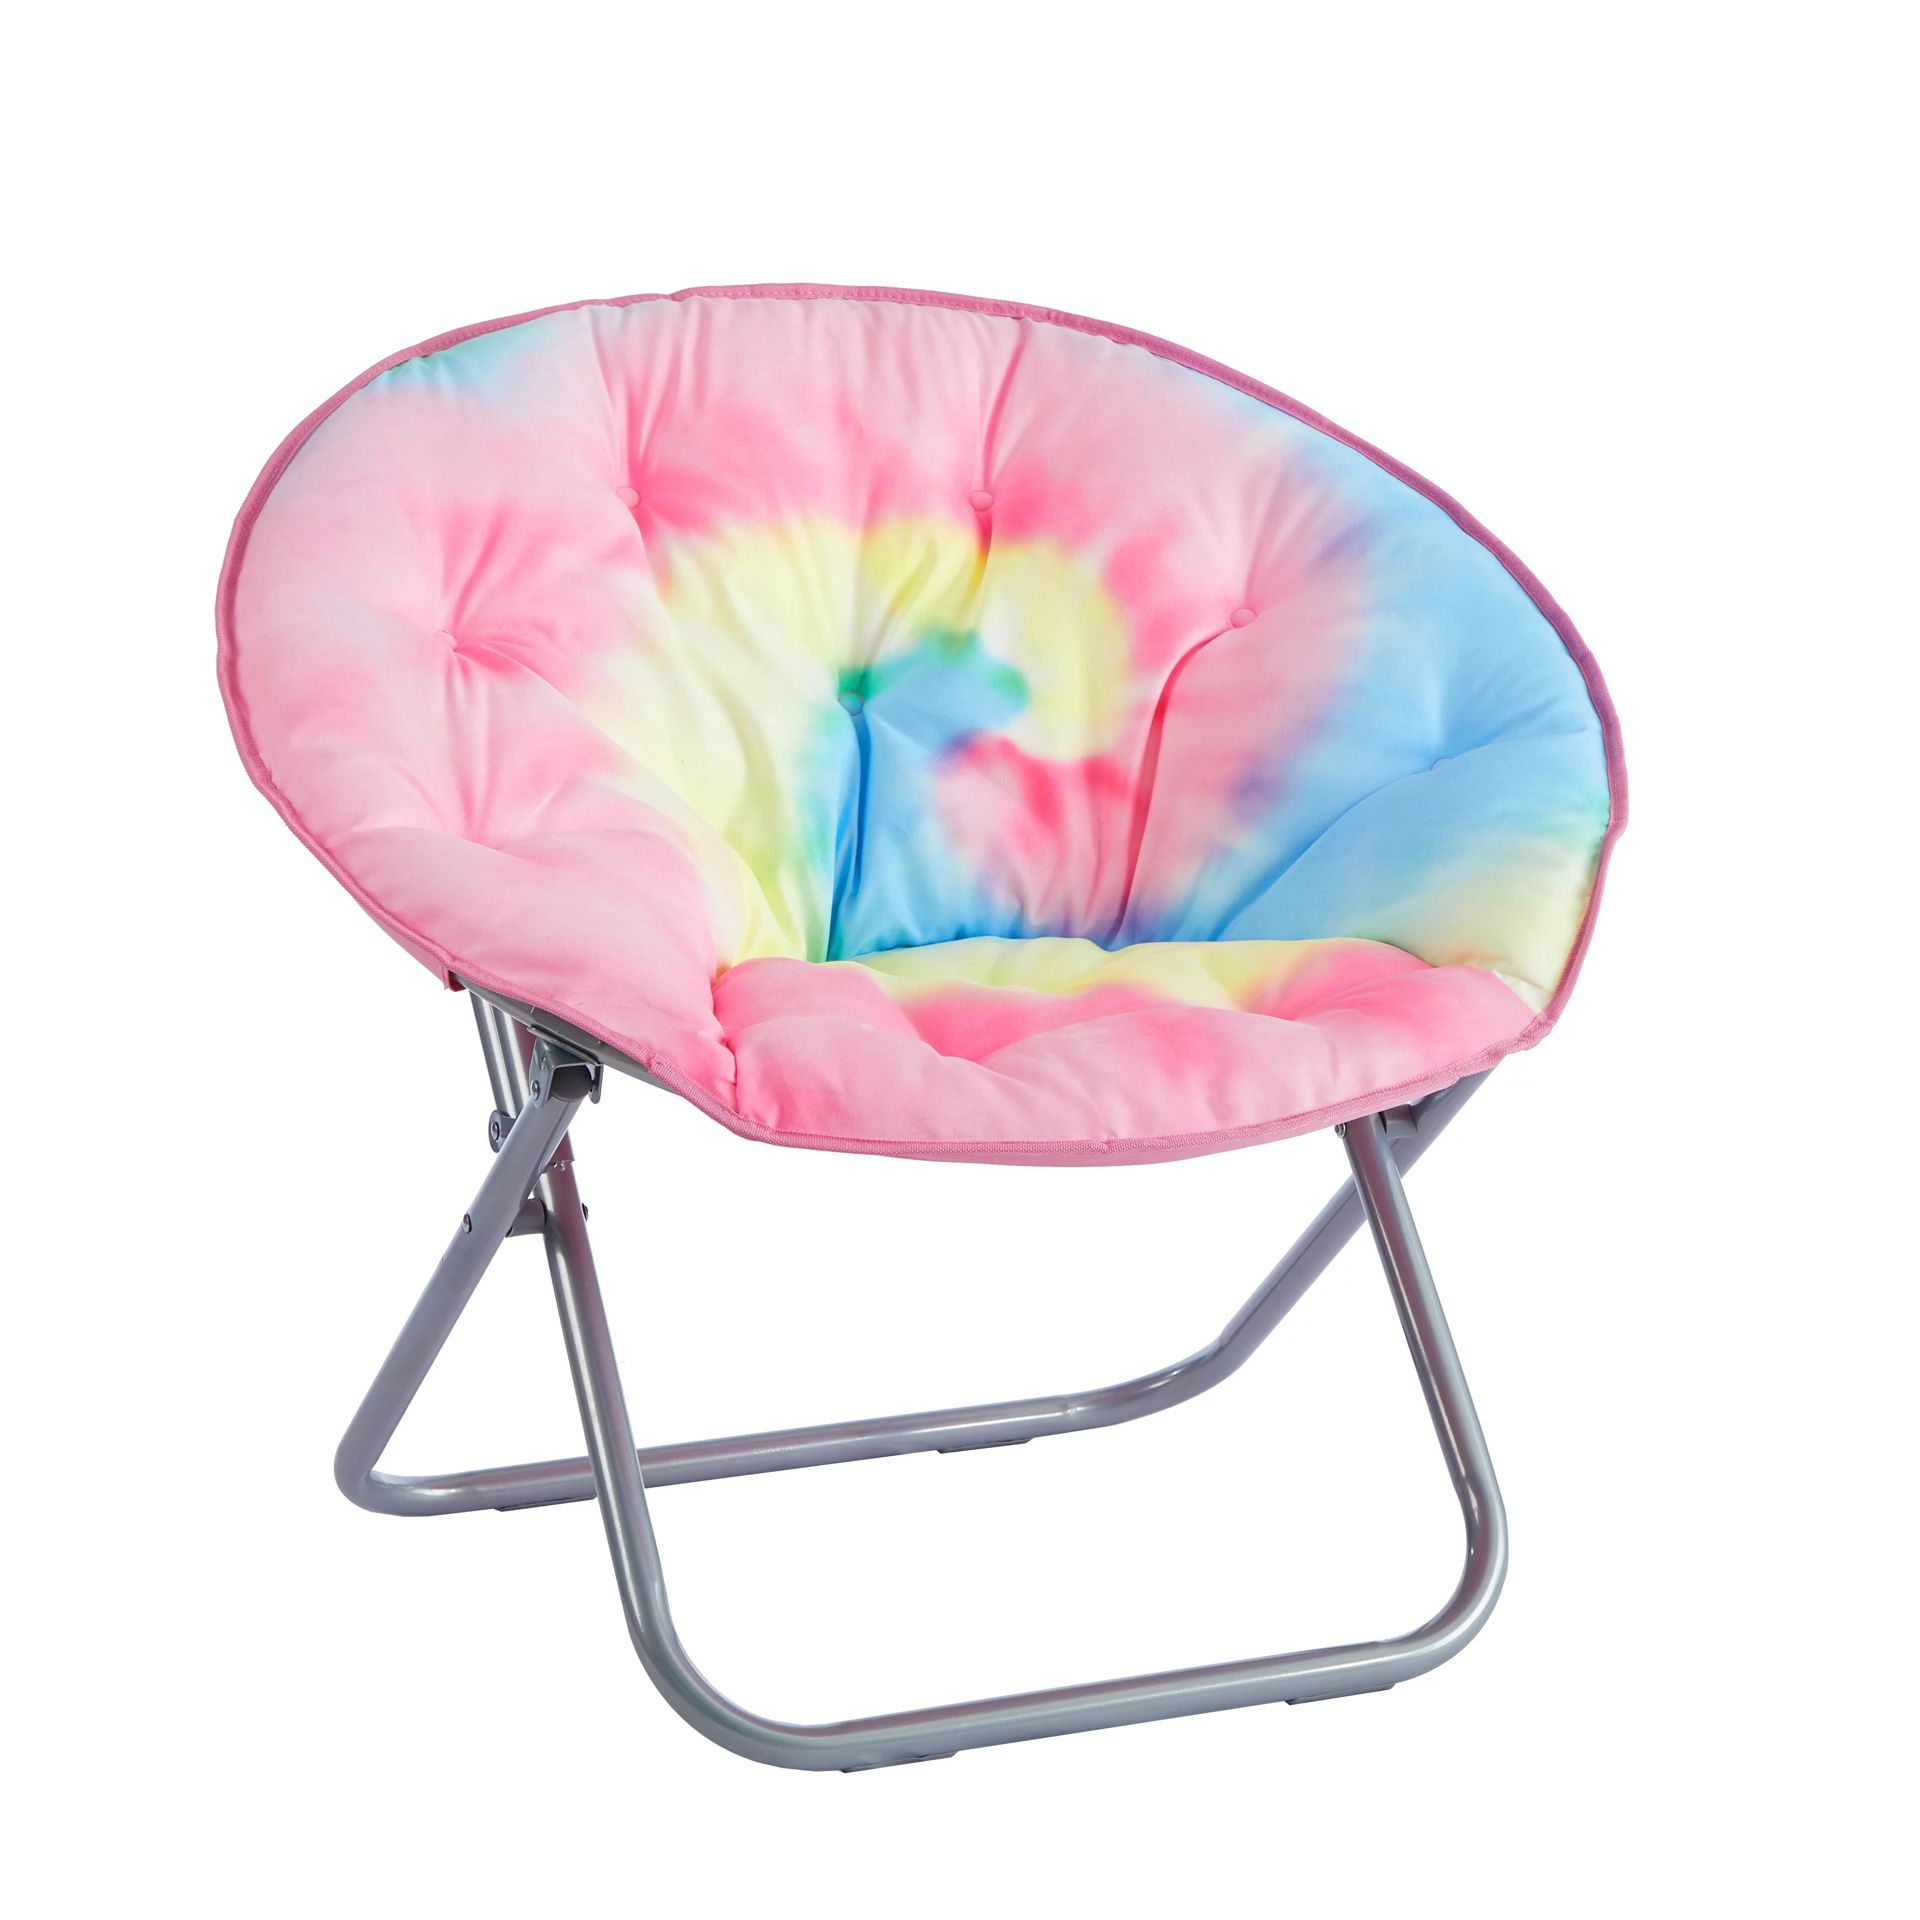 Justice Oval Oversized Faux Fur Saucer Chair with Holographic Trim,